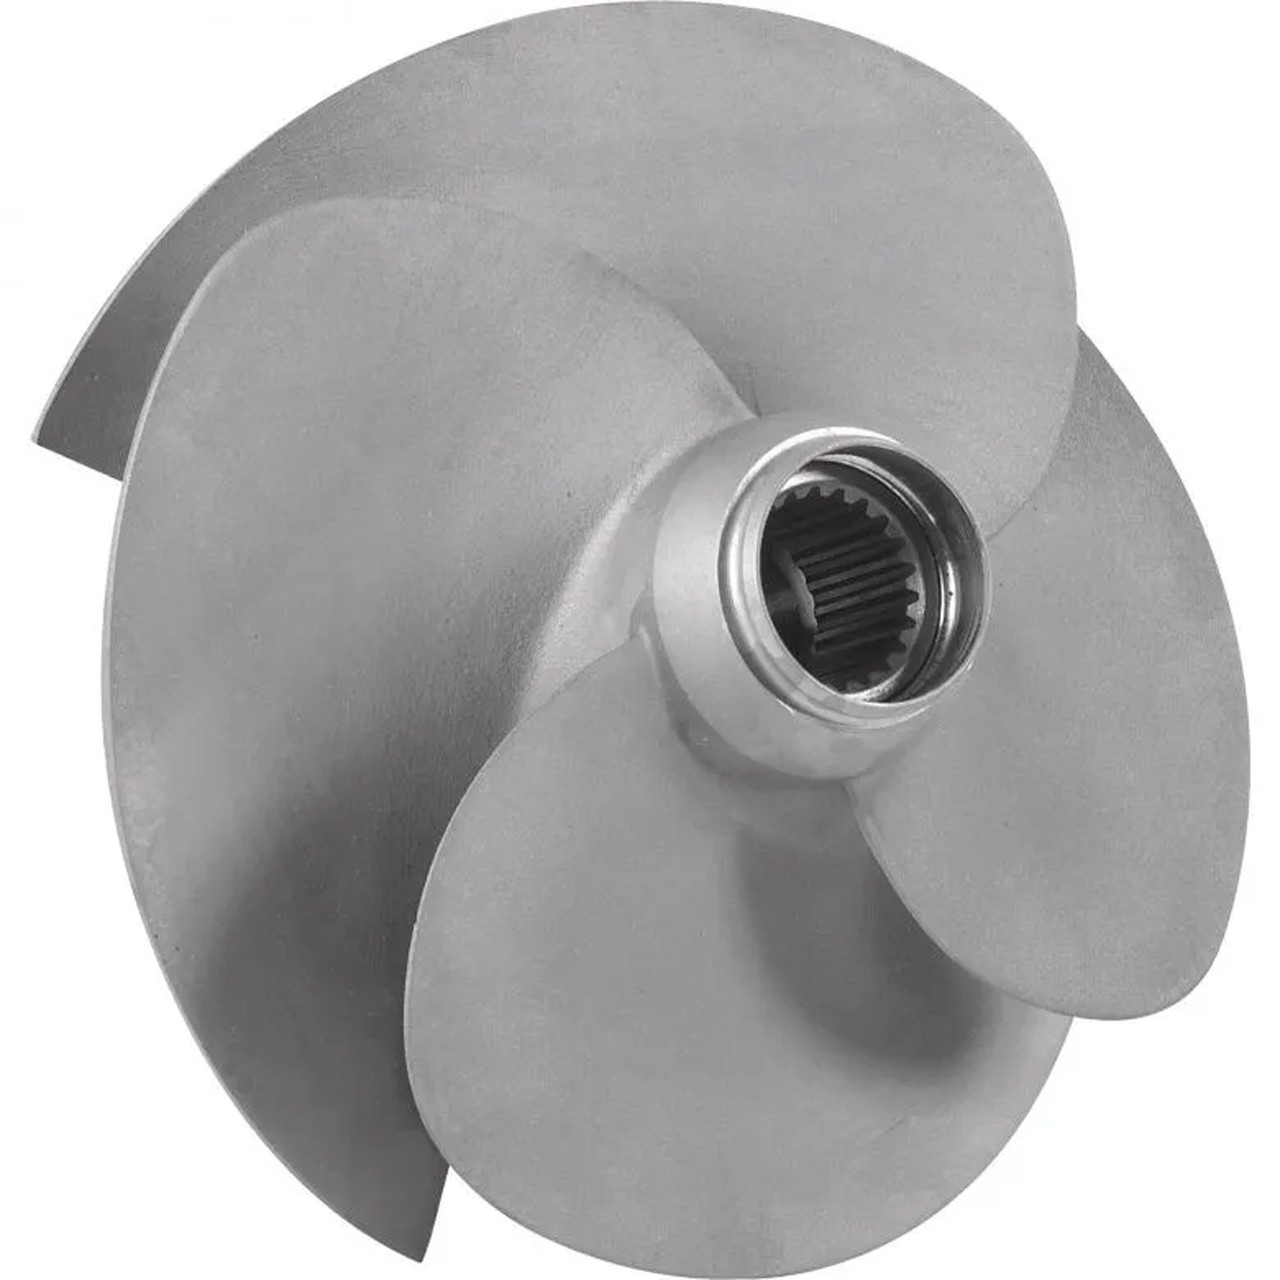 Sea-Doo New OEM 2012-2015 RXP-X 260 High Performance Impeller Assembly 267000984